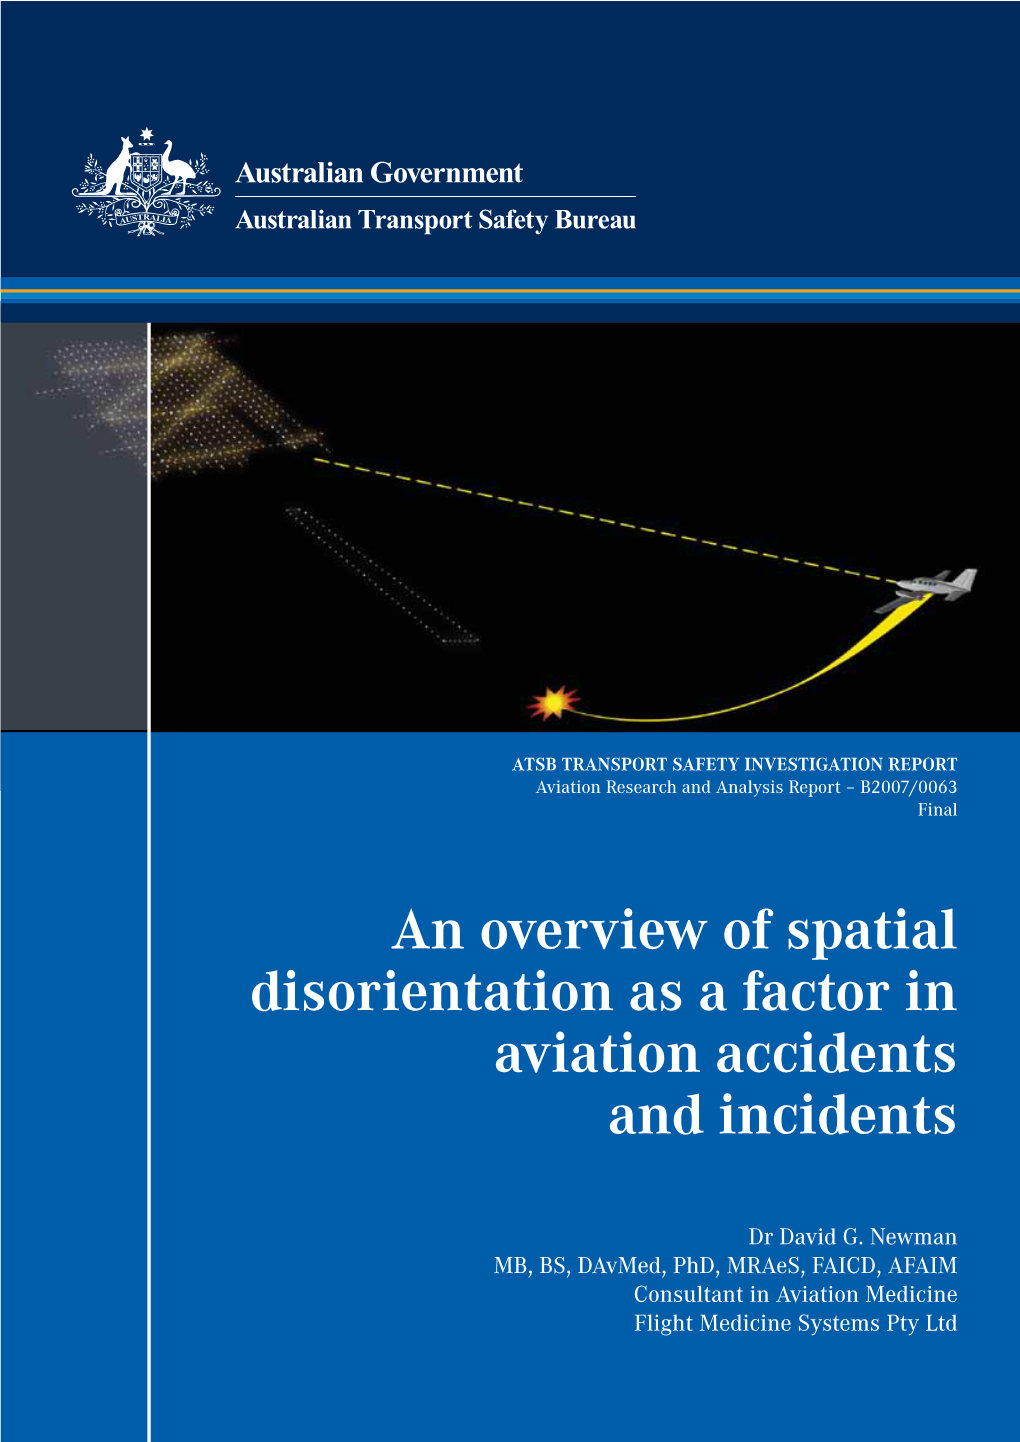 An Overview of Spatial Disorientation As a Factor in Aviation Accidents and Incidents